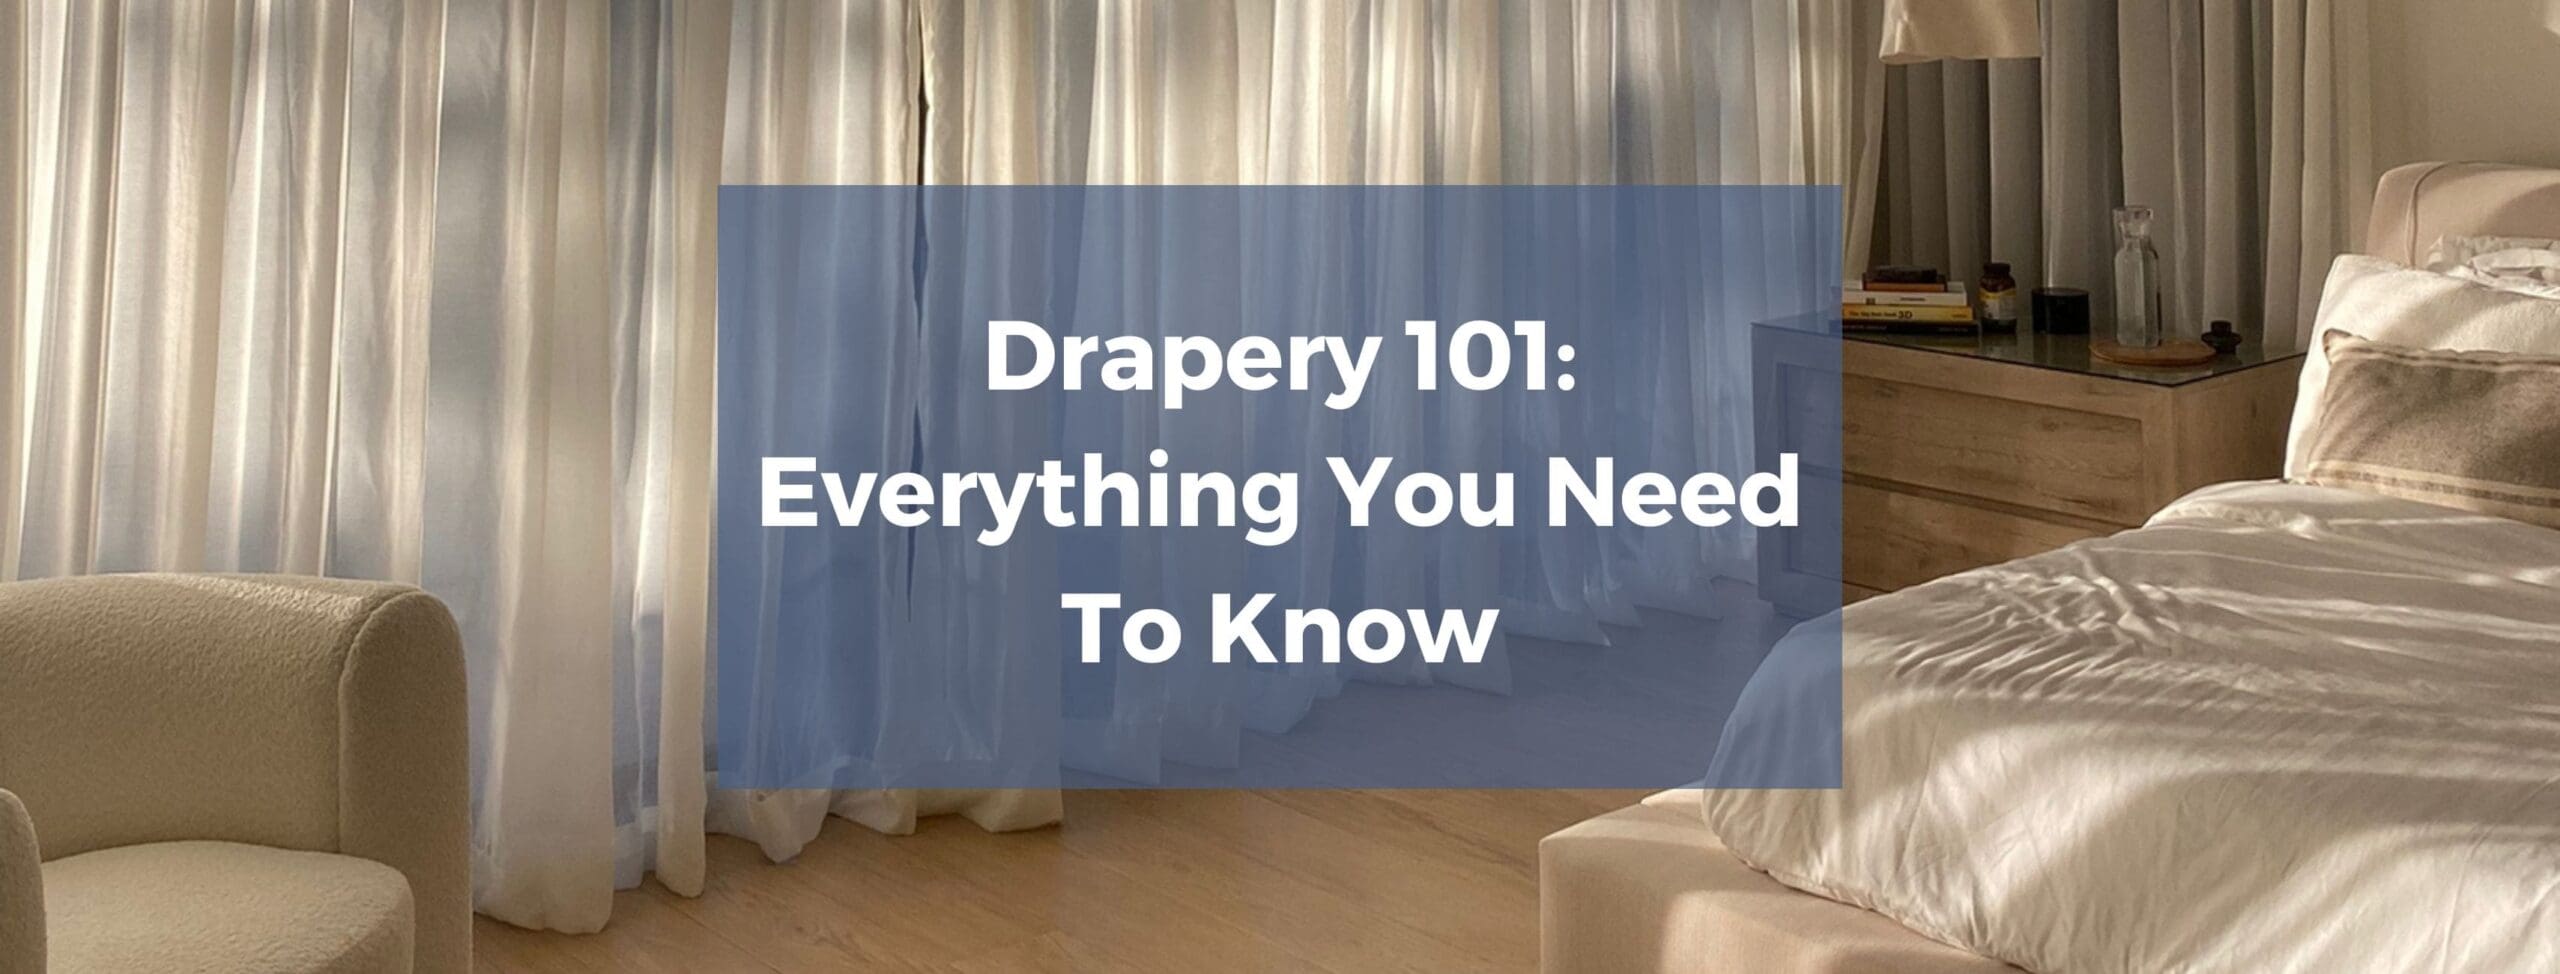 Drapery 101: Everything You Need To Know